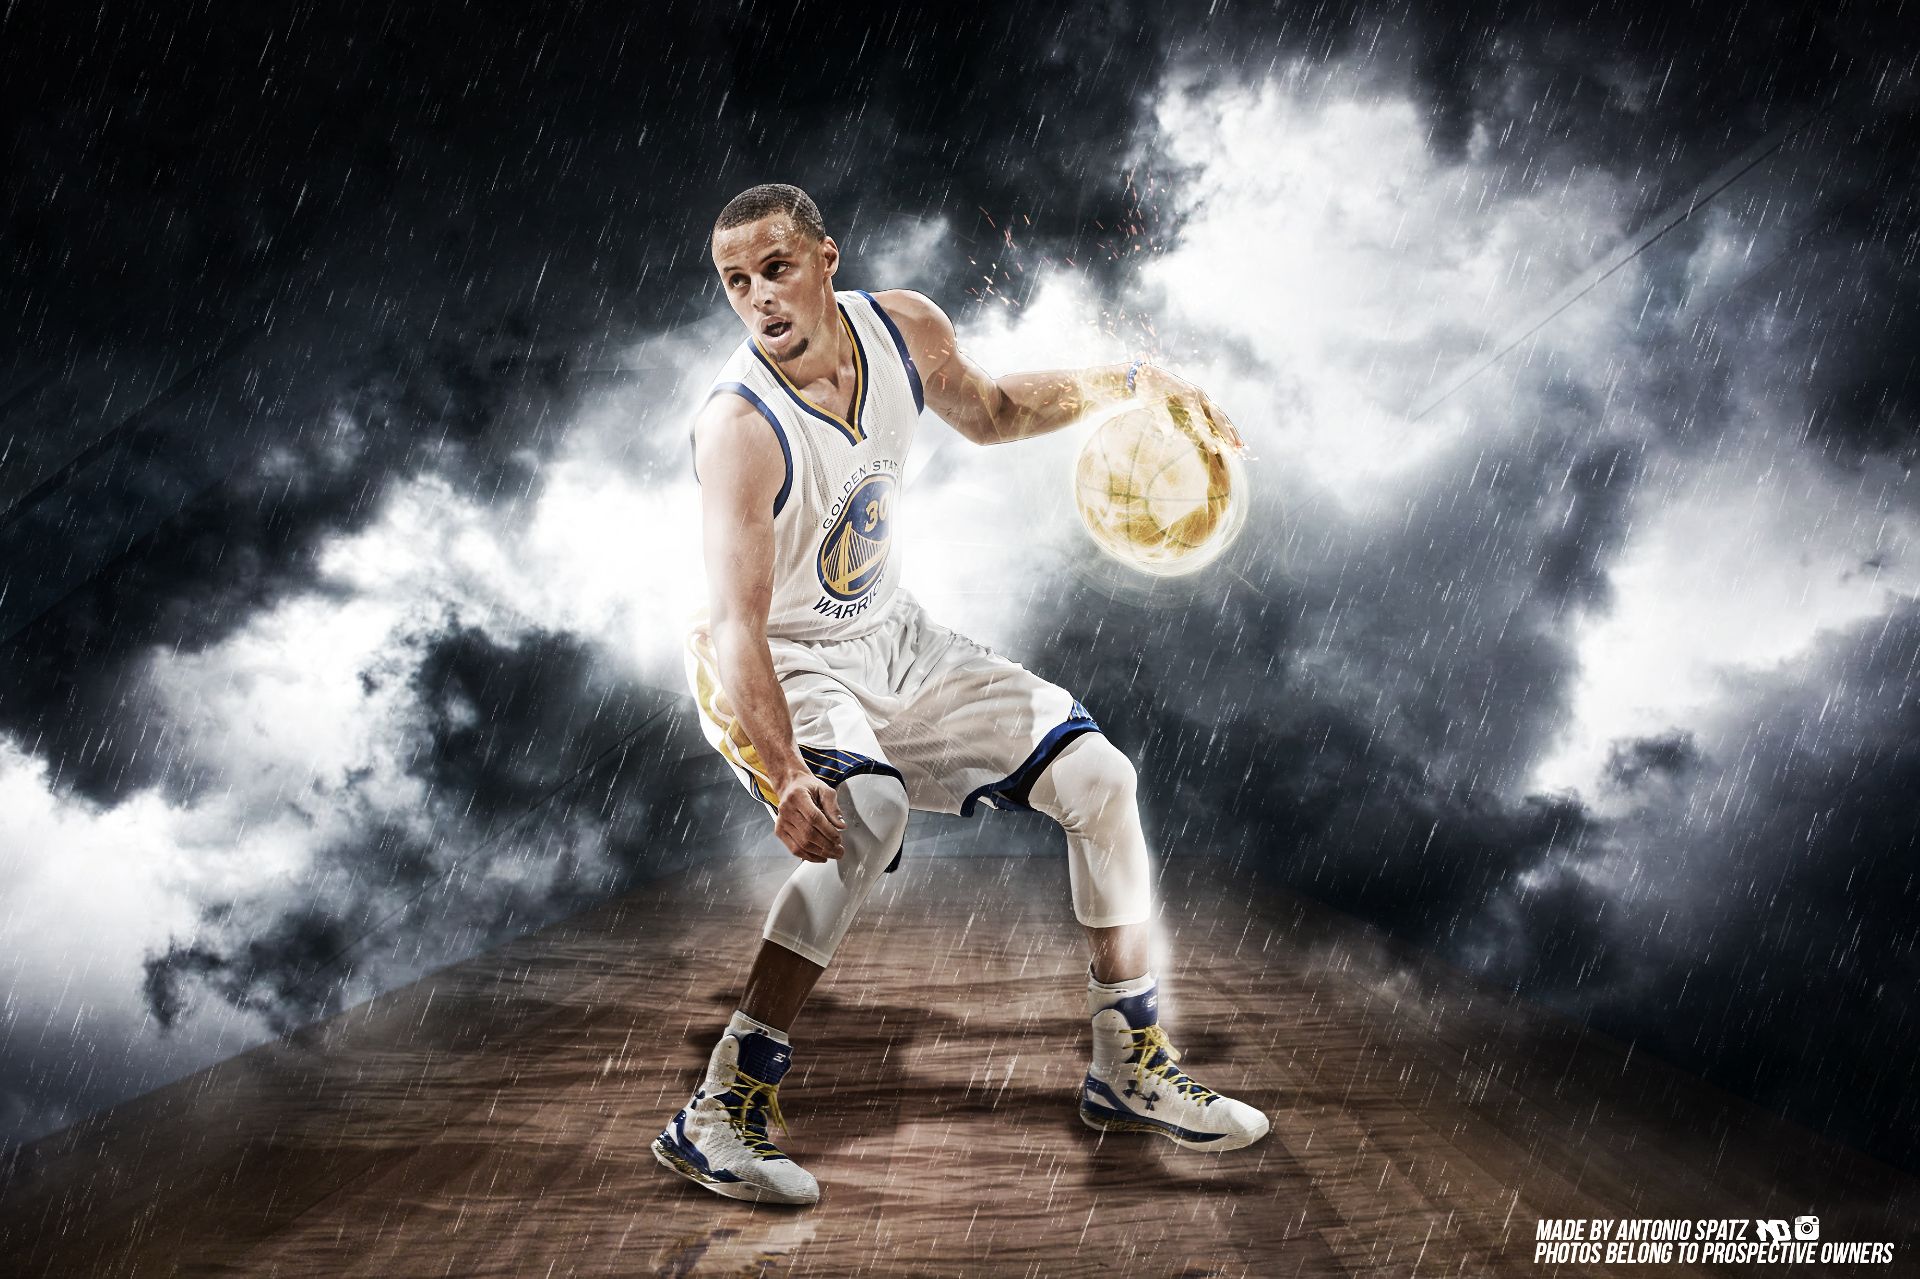 Stephen Curry Steph Curry Nba Stephen iPhone 11 Wallpapers Free Download